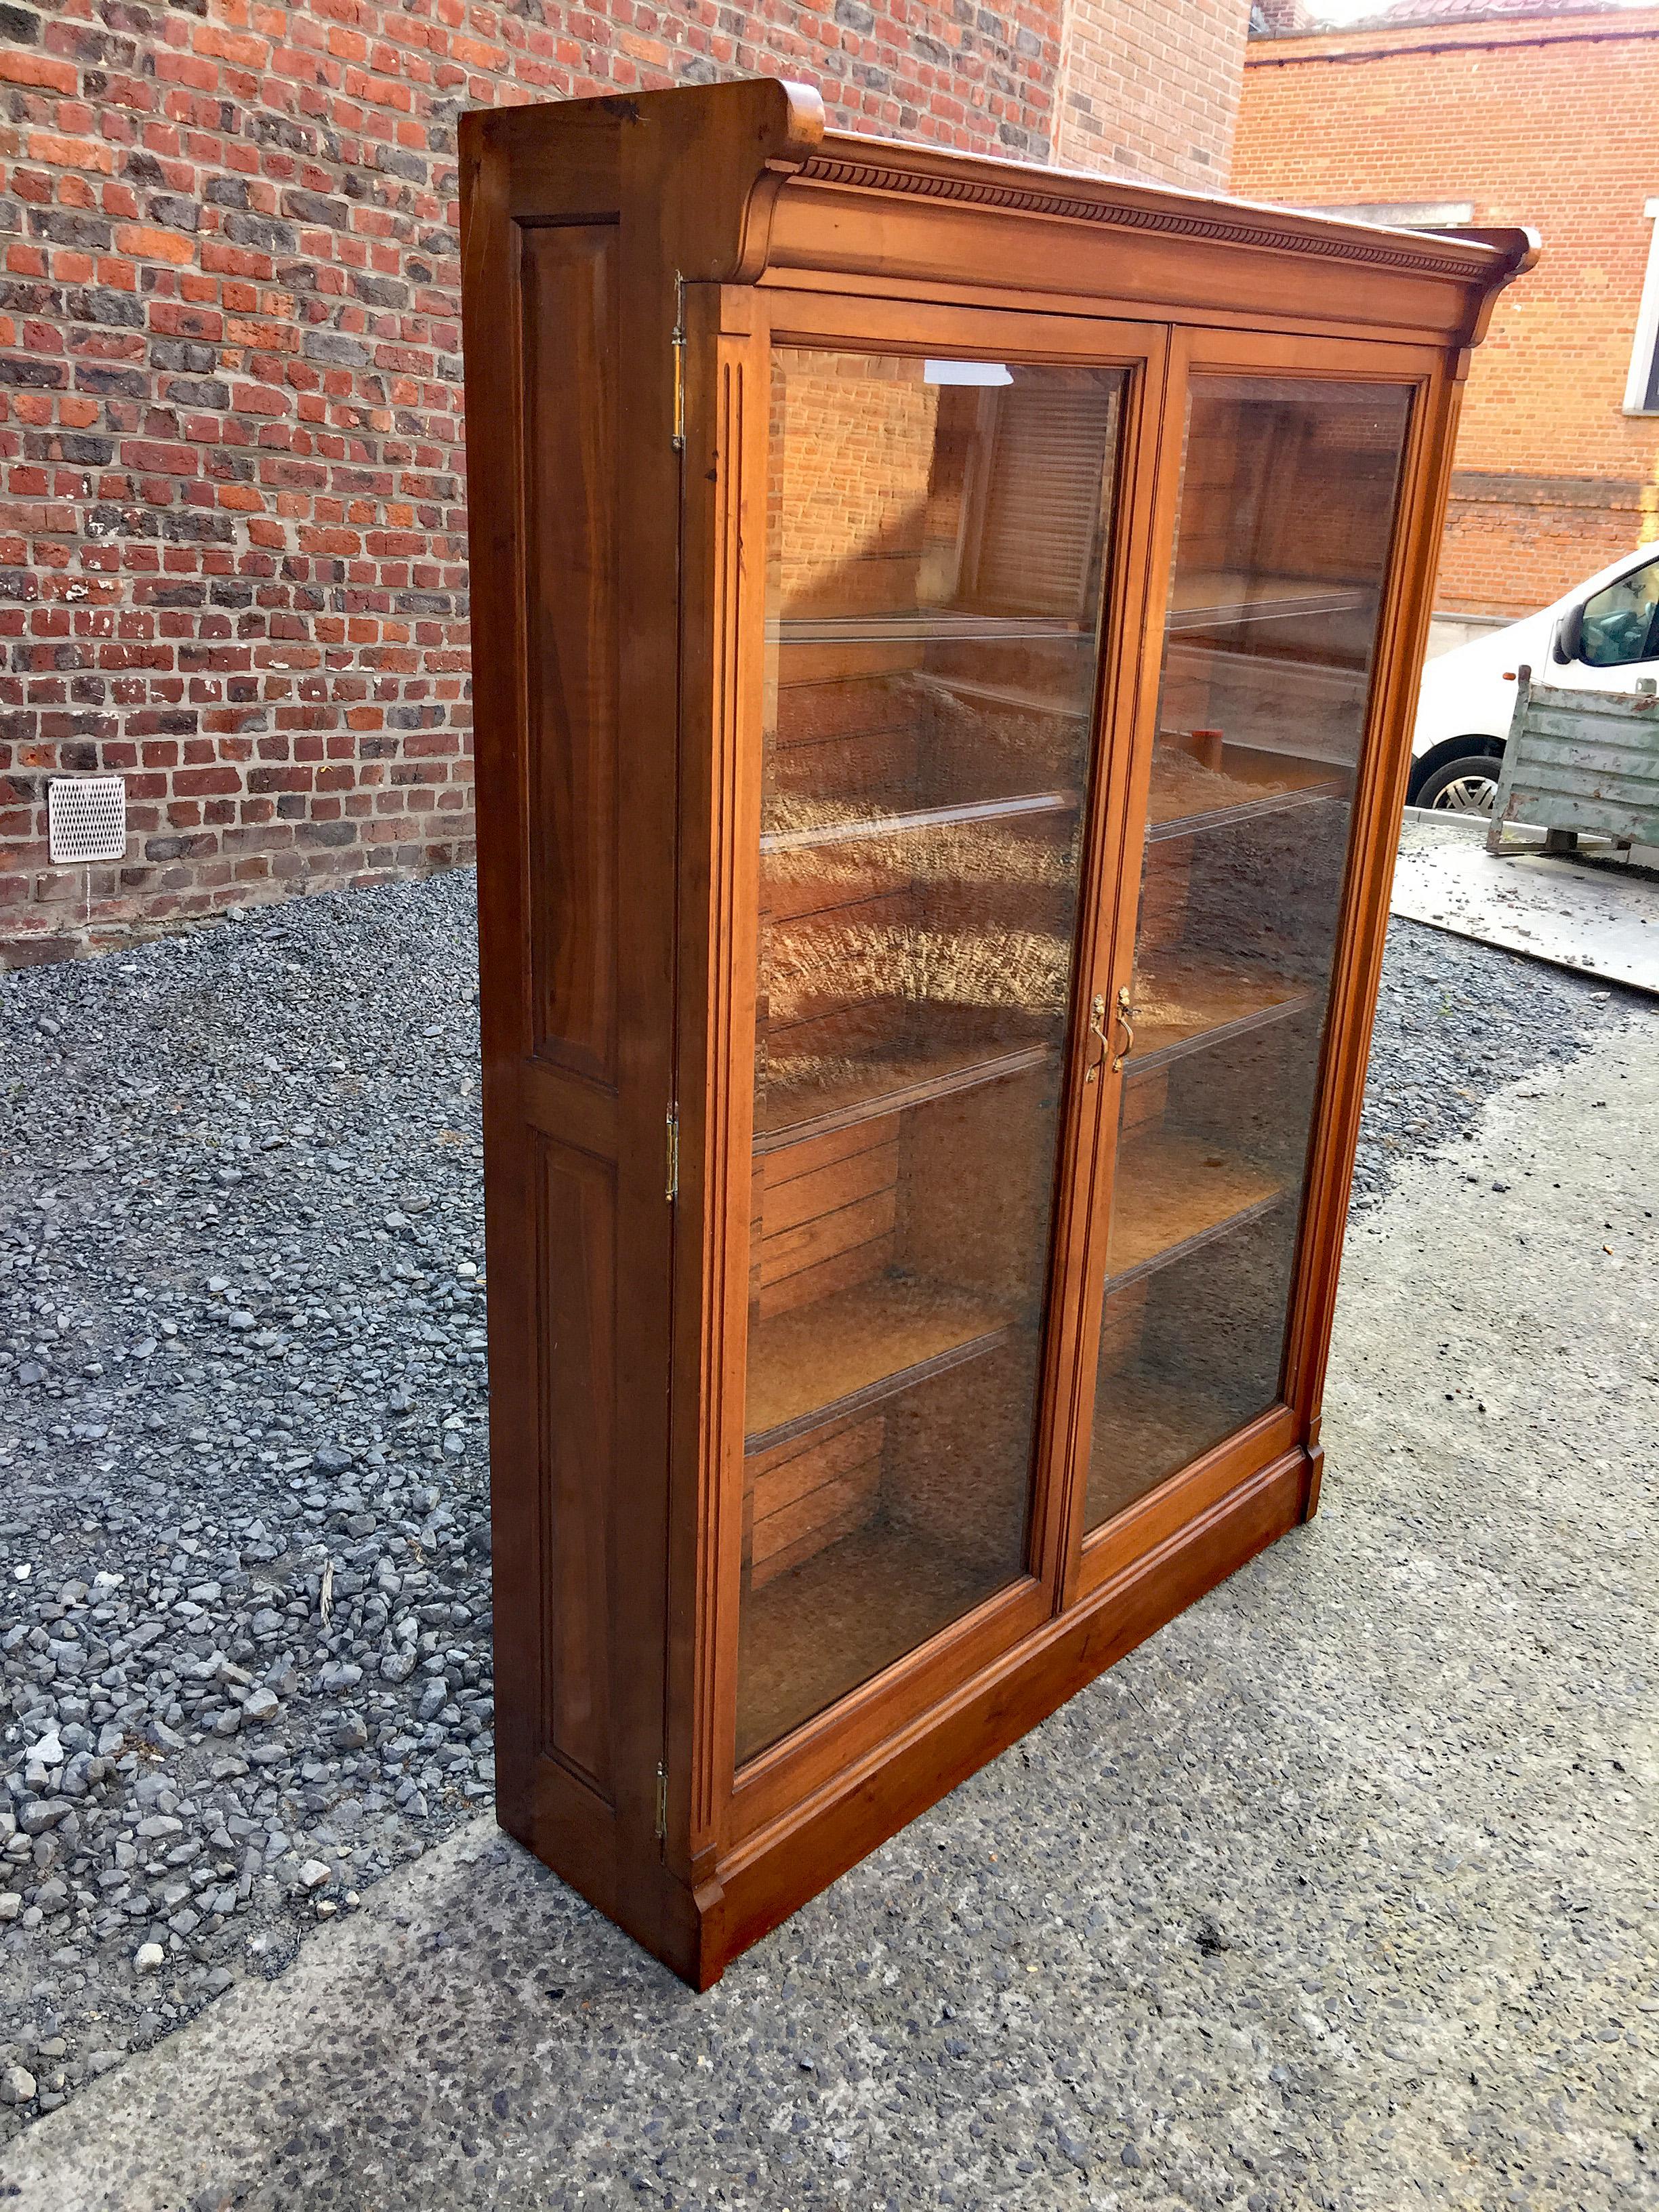 Storage Unit or Library in American Walnut, circa 1900 For Sale 4